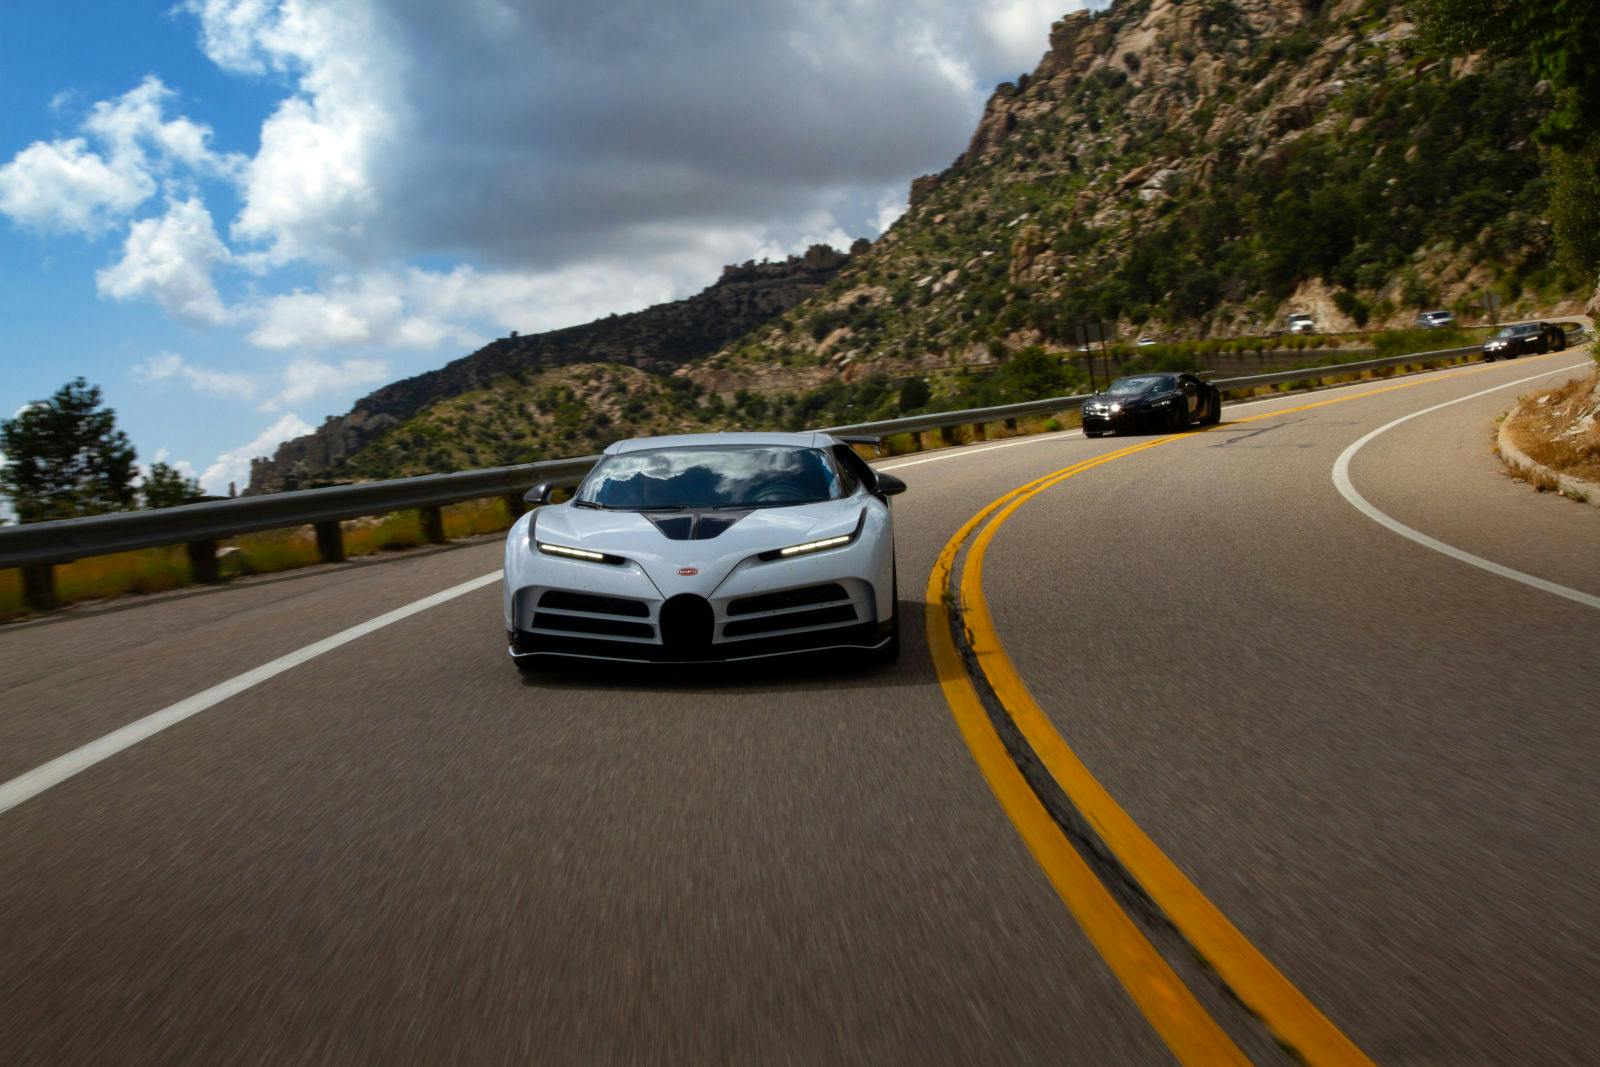 Bugatti engineers complete the next development phase of the exclusive Centodieci with hot weather testing in the Arizona desert.